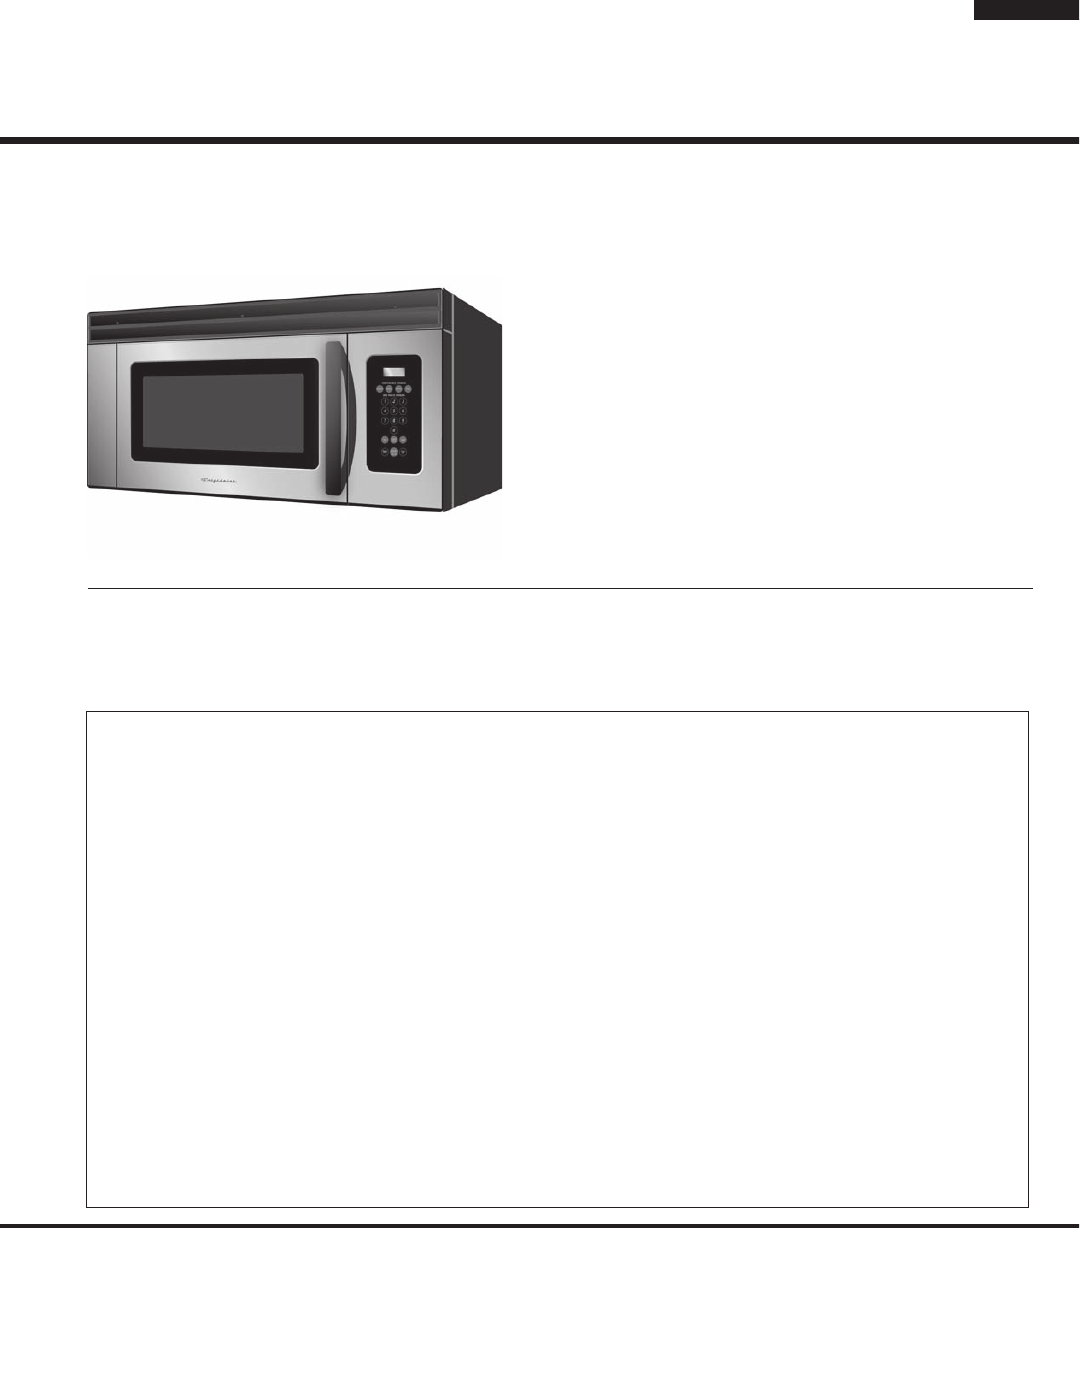 Electrolux Microwave Oven Fmv156Dbe Users Manual